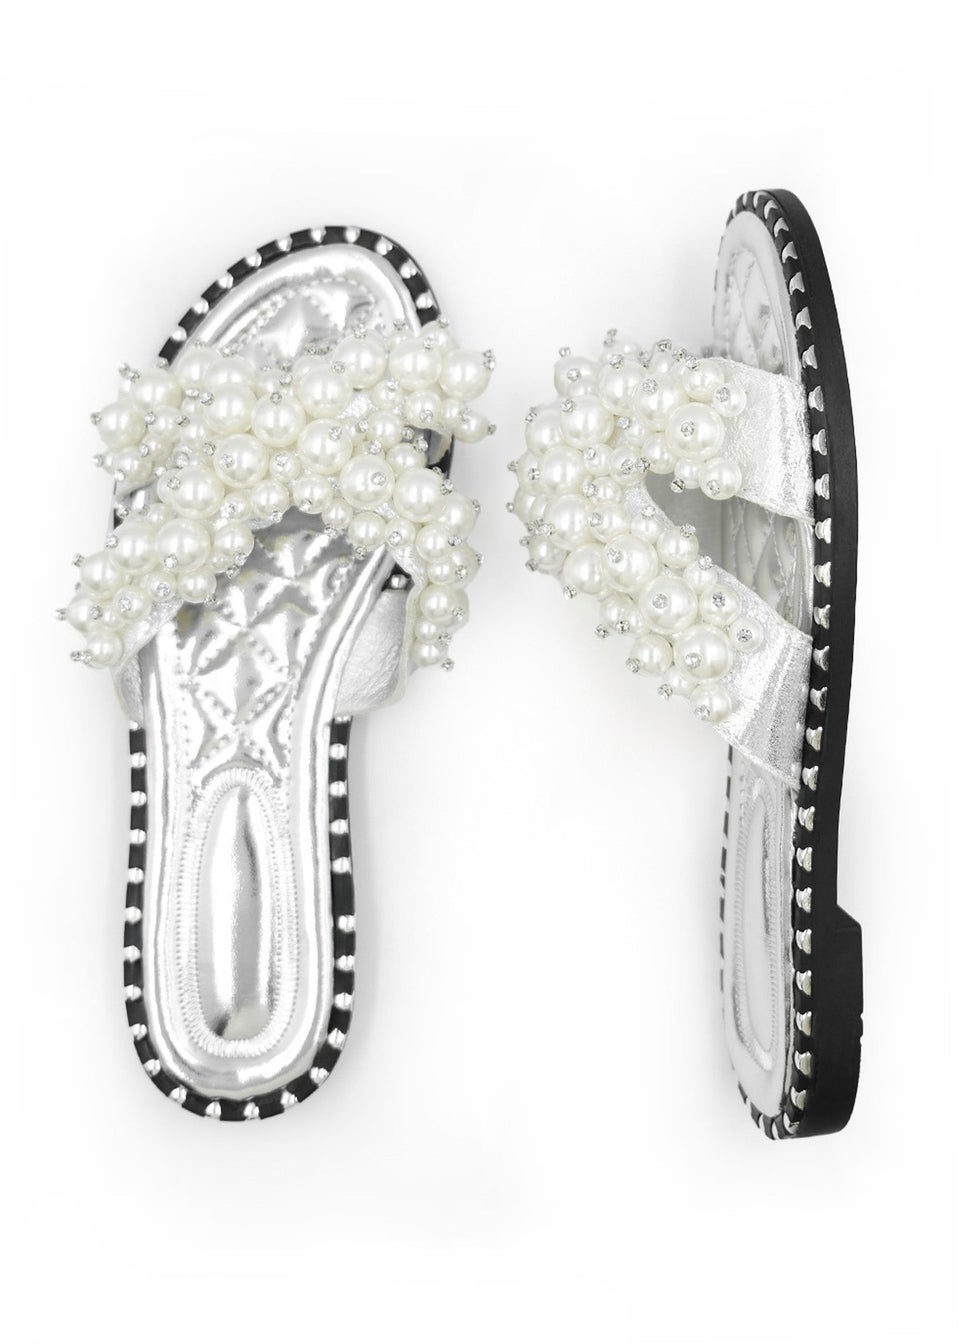 Where's That From Iona Wide Fit Silver Pearl Sandals